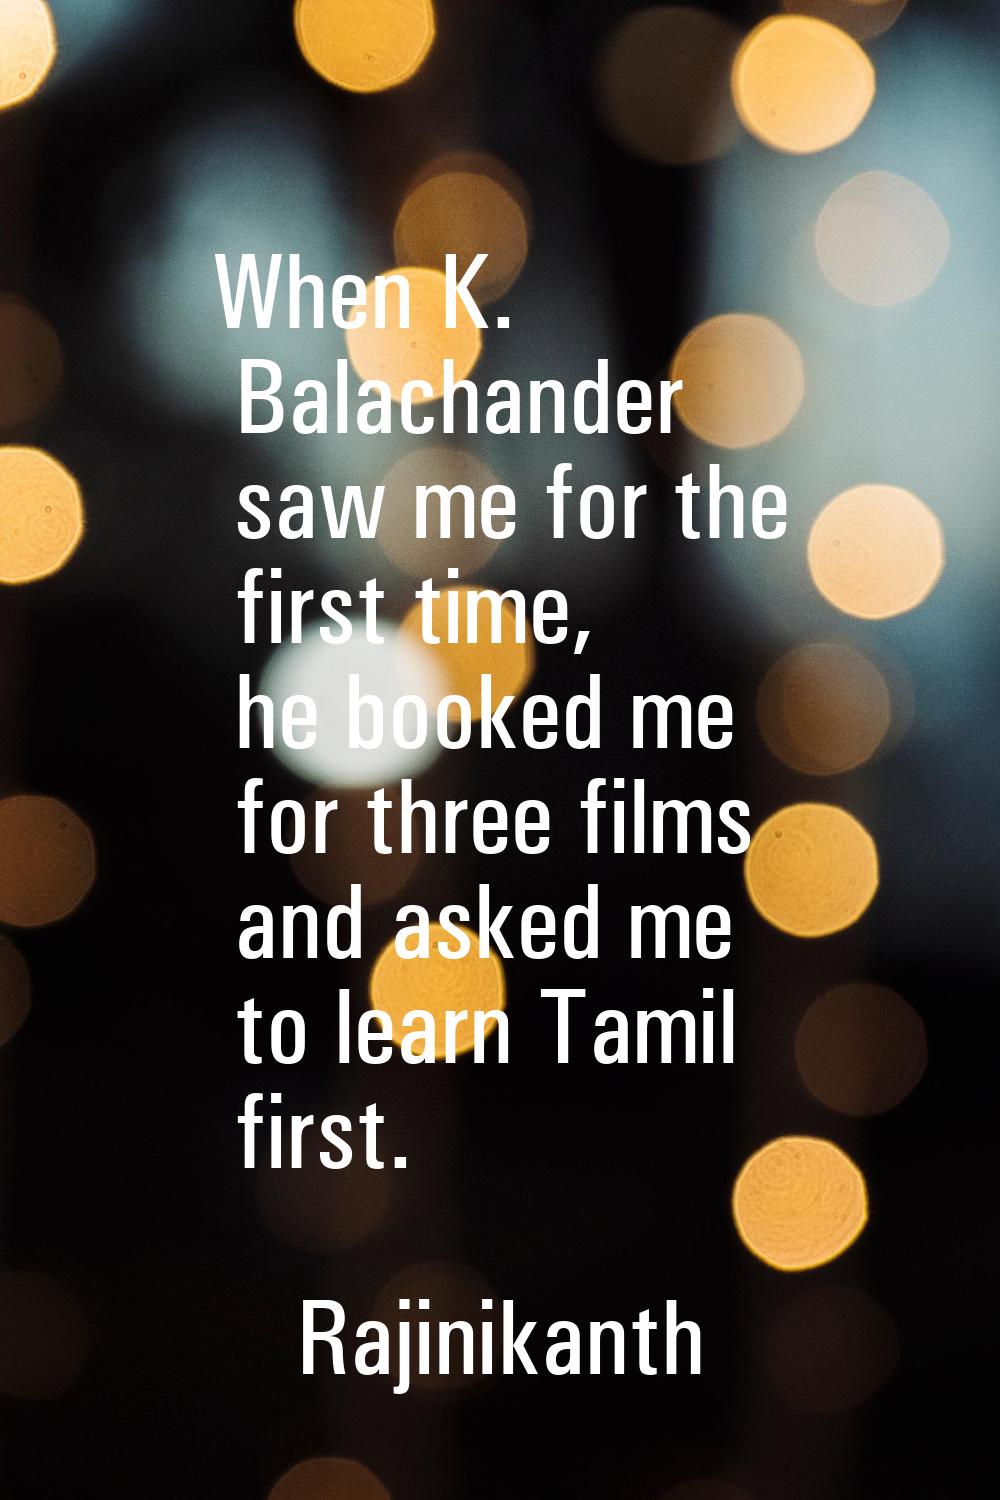 When K. Balachander saw me for the first time, he booked me for three films and asked me to learn T